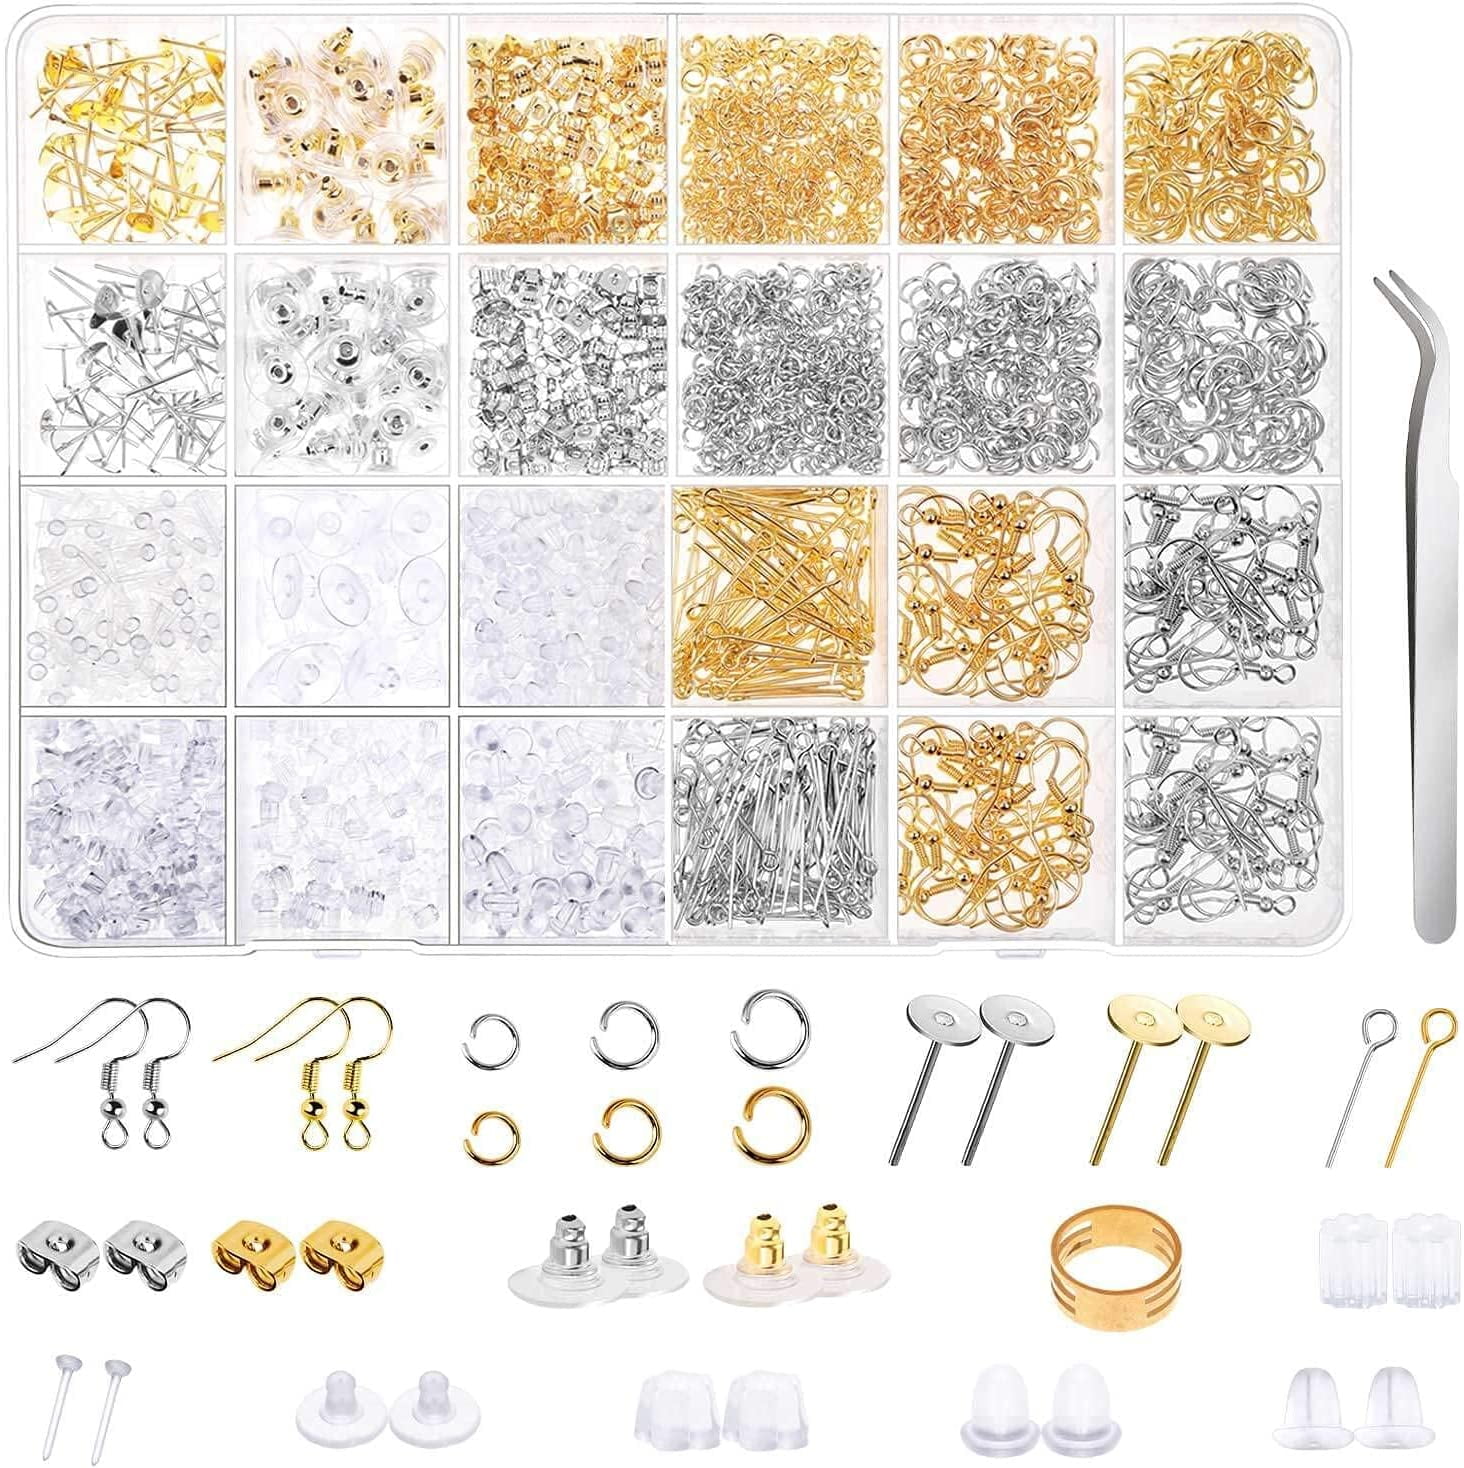 Earring Hooks for Jewelry Making, 820pcs Earring Making Kit with